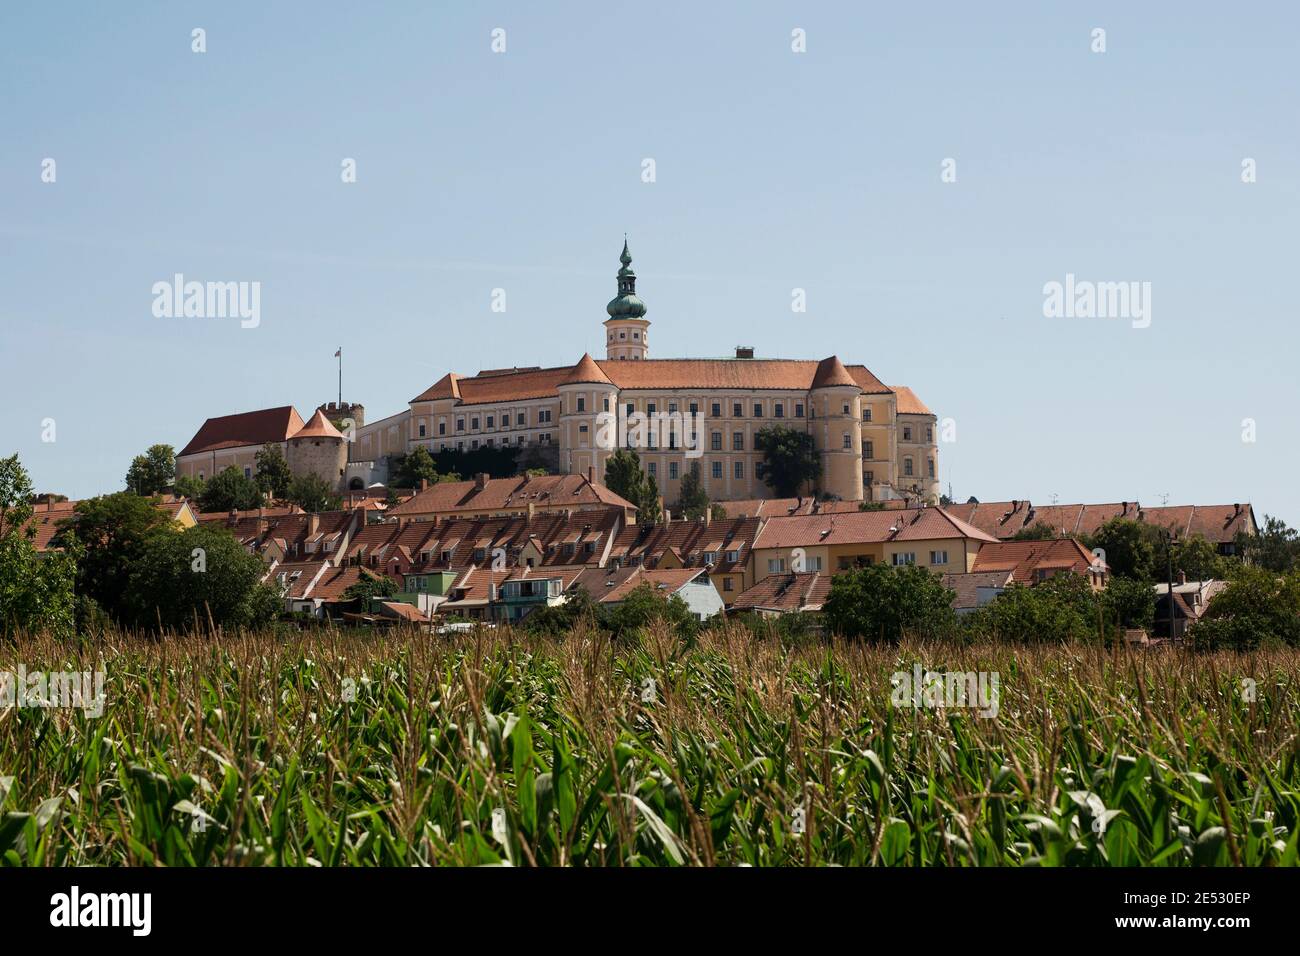 The baroque castle and museum at Mikulov, South Moravia, Czechia. The eighteenth-century building was restored after World War II. Stock Photo